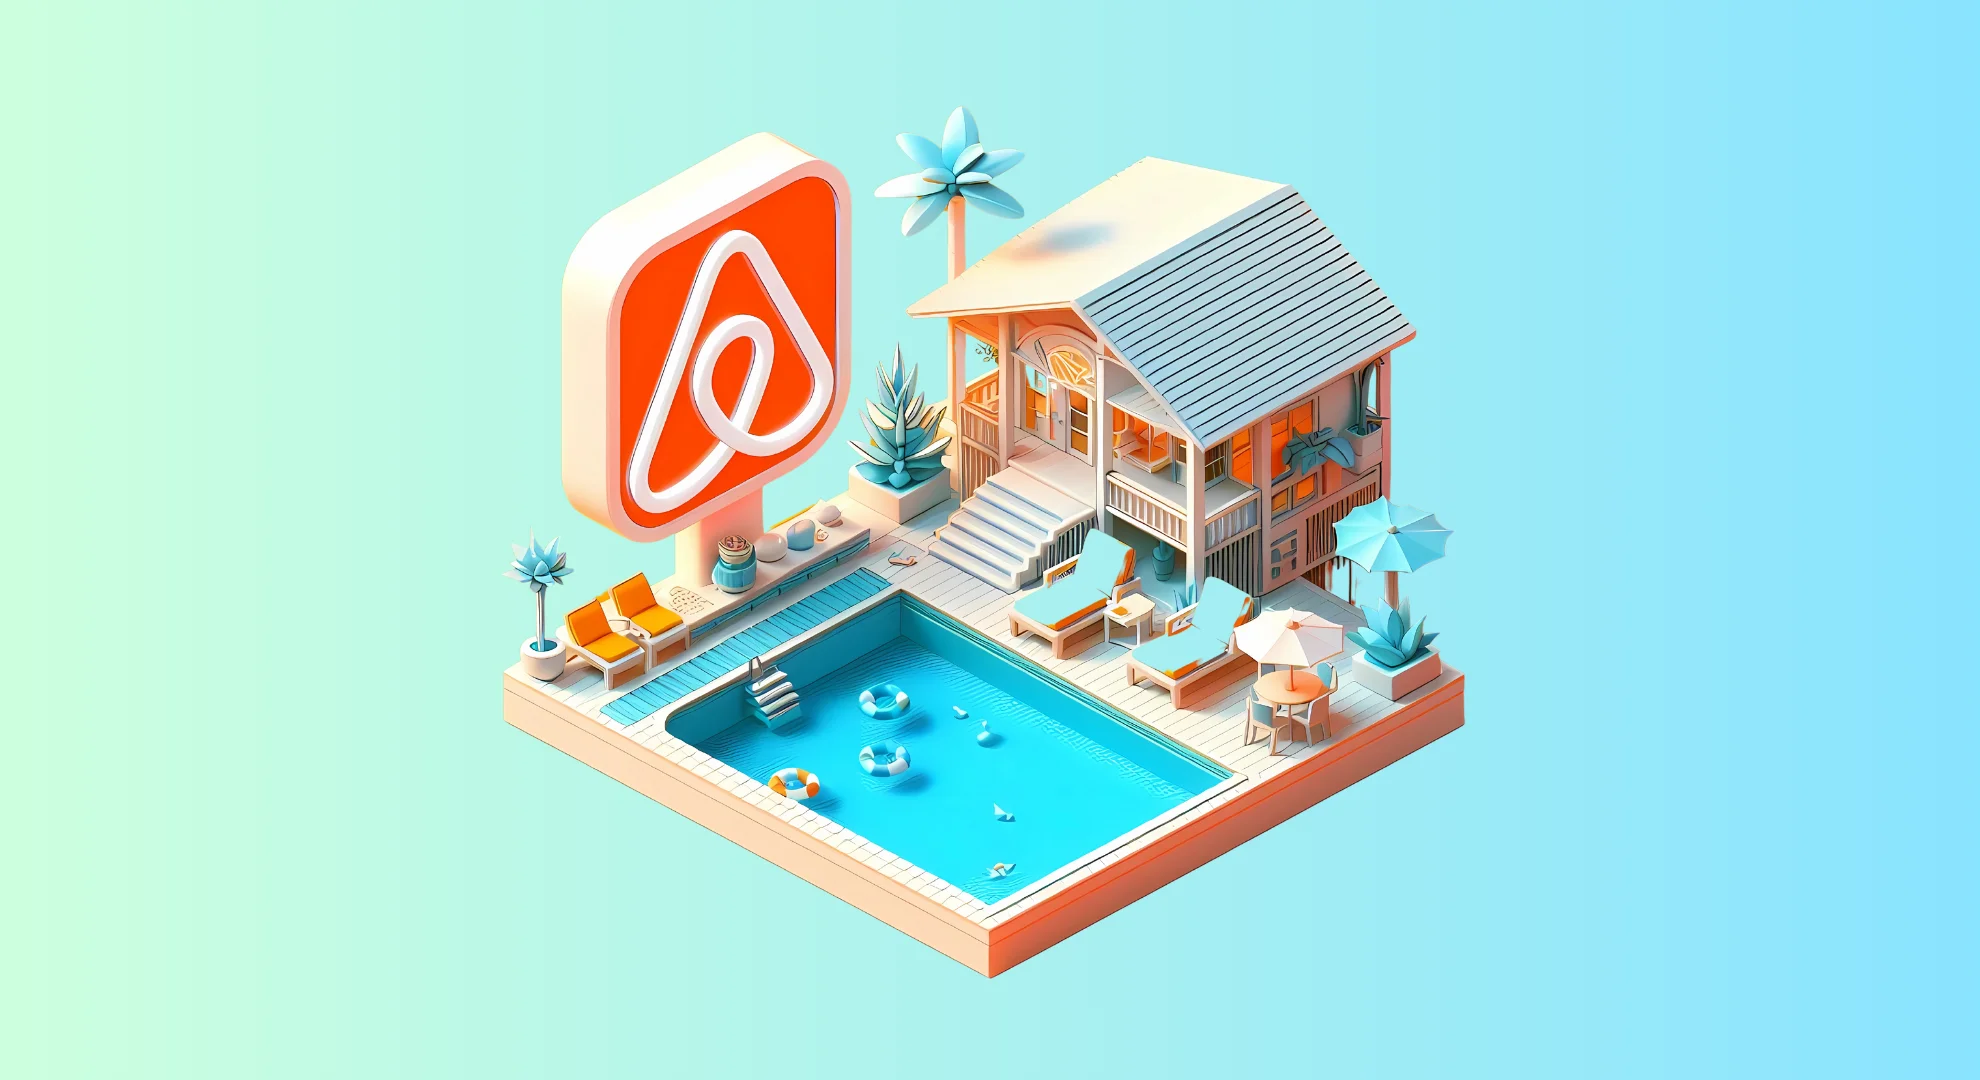 Bookkeeping and Accounting for Airbnb